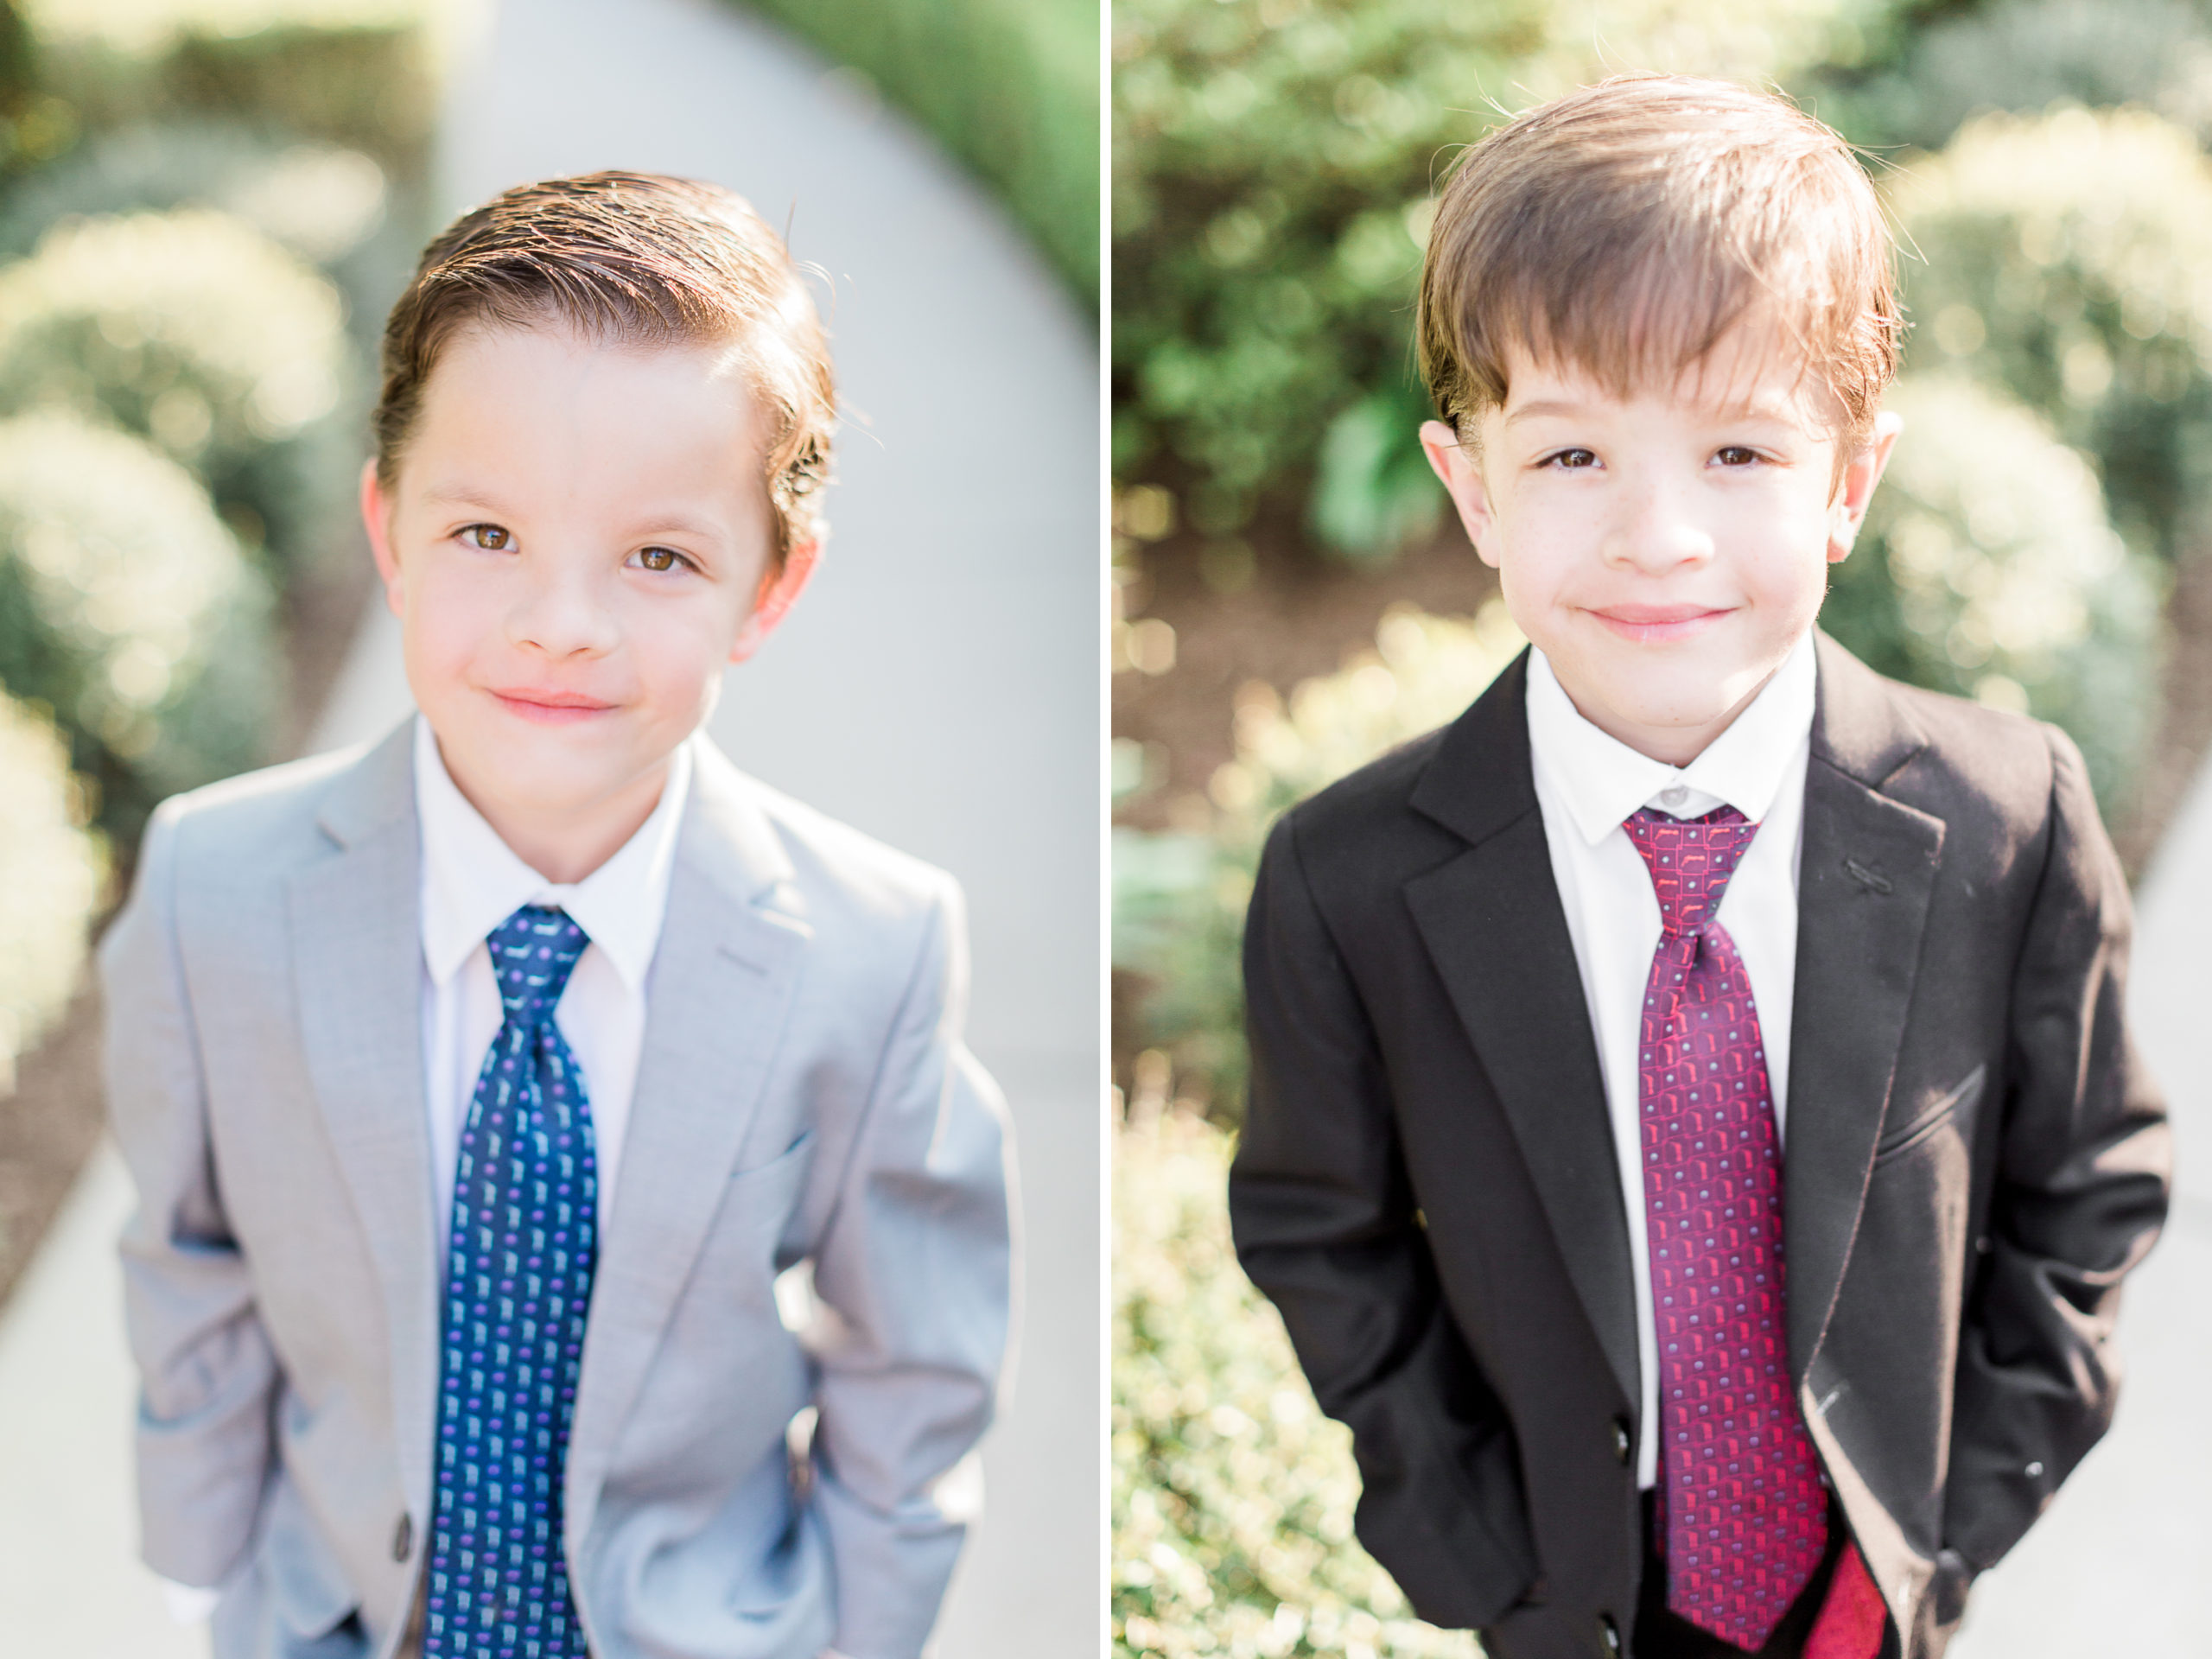 Twin brothers smile for the camera during their portrait photography session